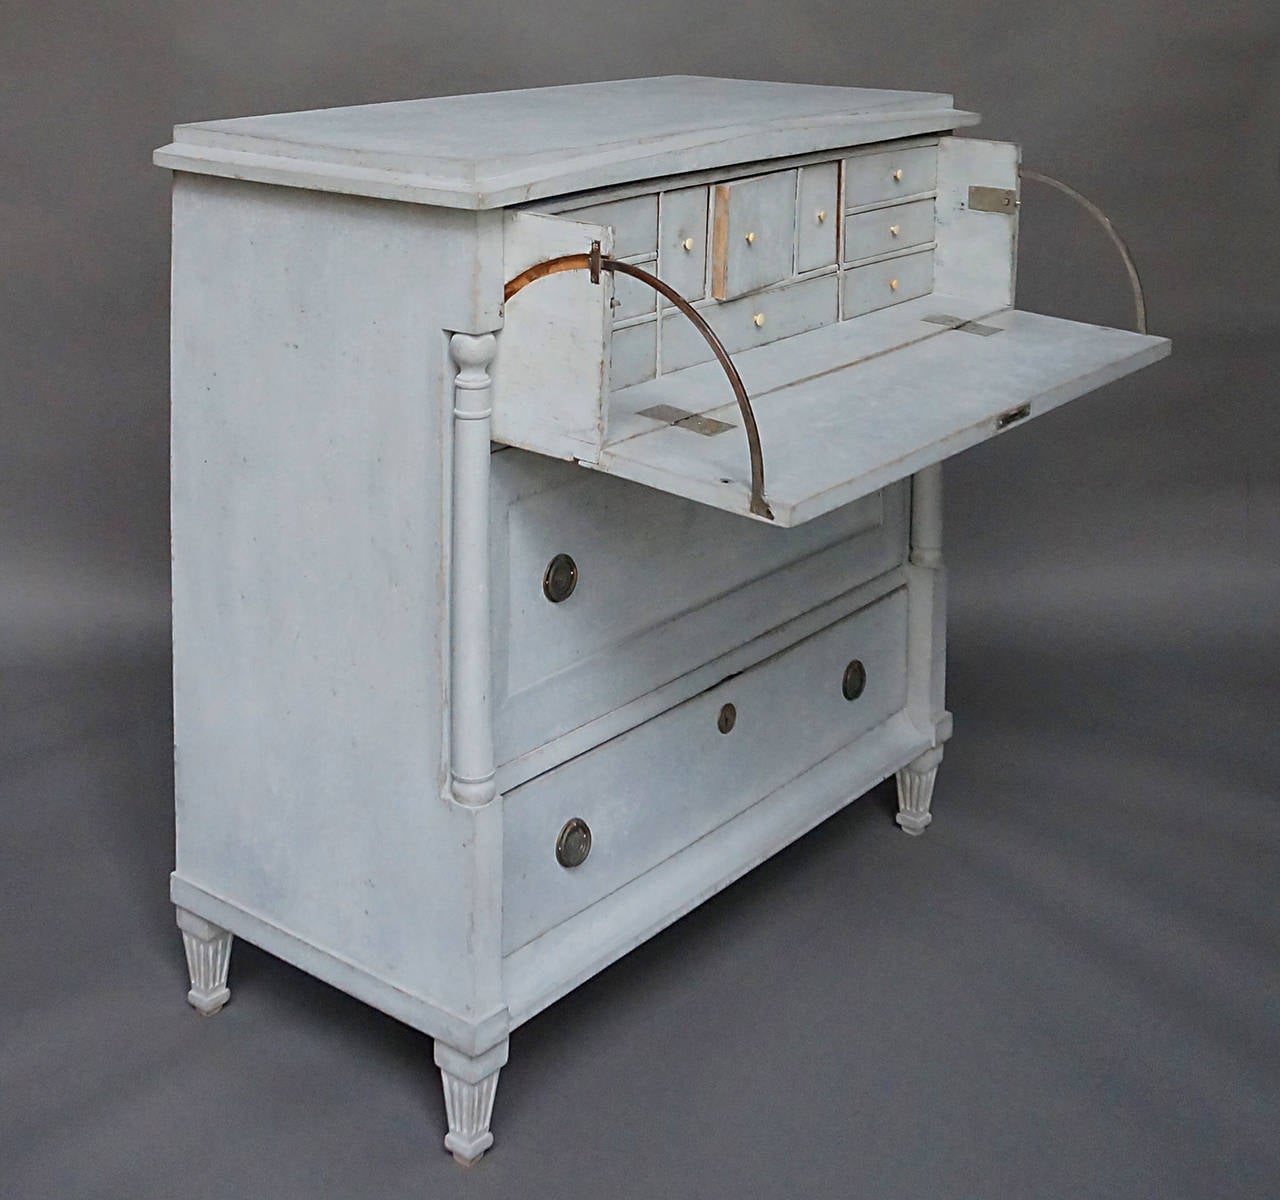 Swedish butler's desk with two drawers, circa 1850. The writing surface and fitted interior is concealed behind a false drawer front. Simple neoclassical design with shallow pediment at the front and columns at either side. Brass hardware.